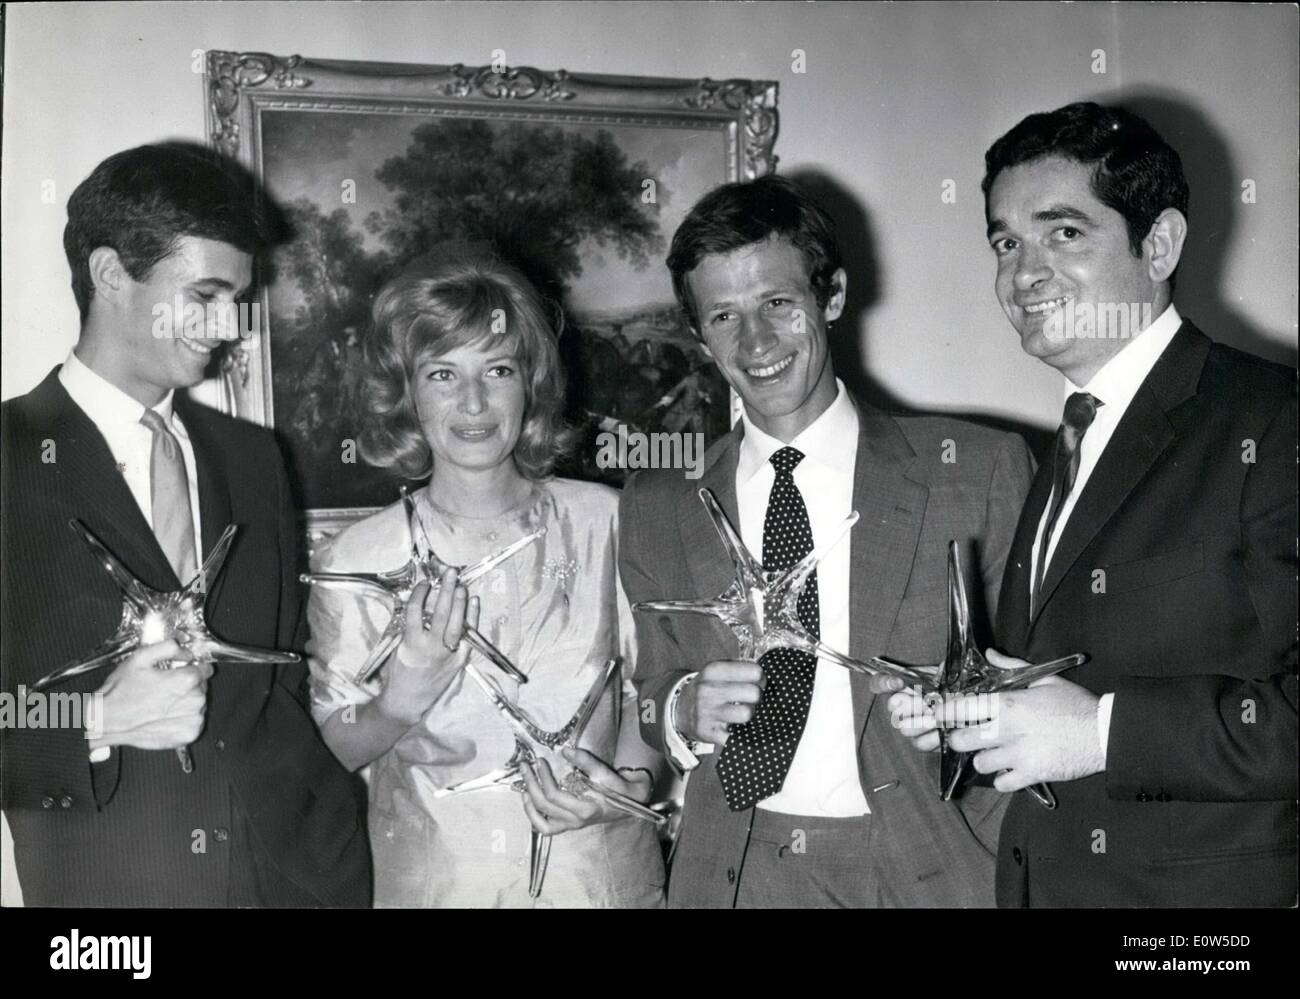 Jul. 05, 1961 - Georges Auric, President of the Cinema Academy, gave out the crystal stars in a Parisian restaurant to stars and directors. Perkins won for his role in ''Psycho''. Vitti won for her role in ''Adventurer''. Belmondo won for his role in ''Breathless''. Demy won for his movie ''Lola' Stock Photo